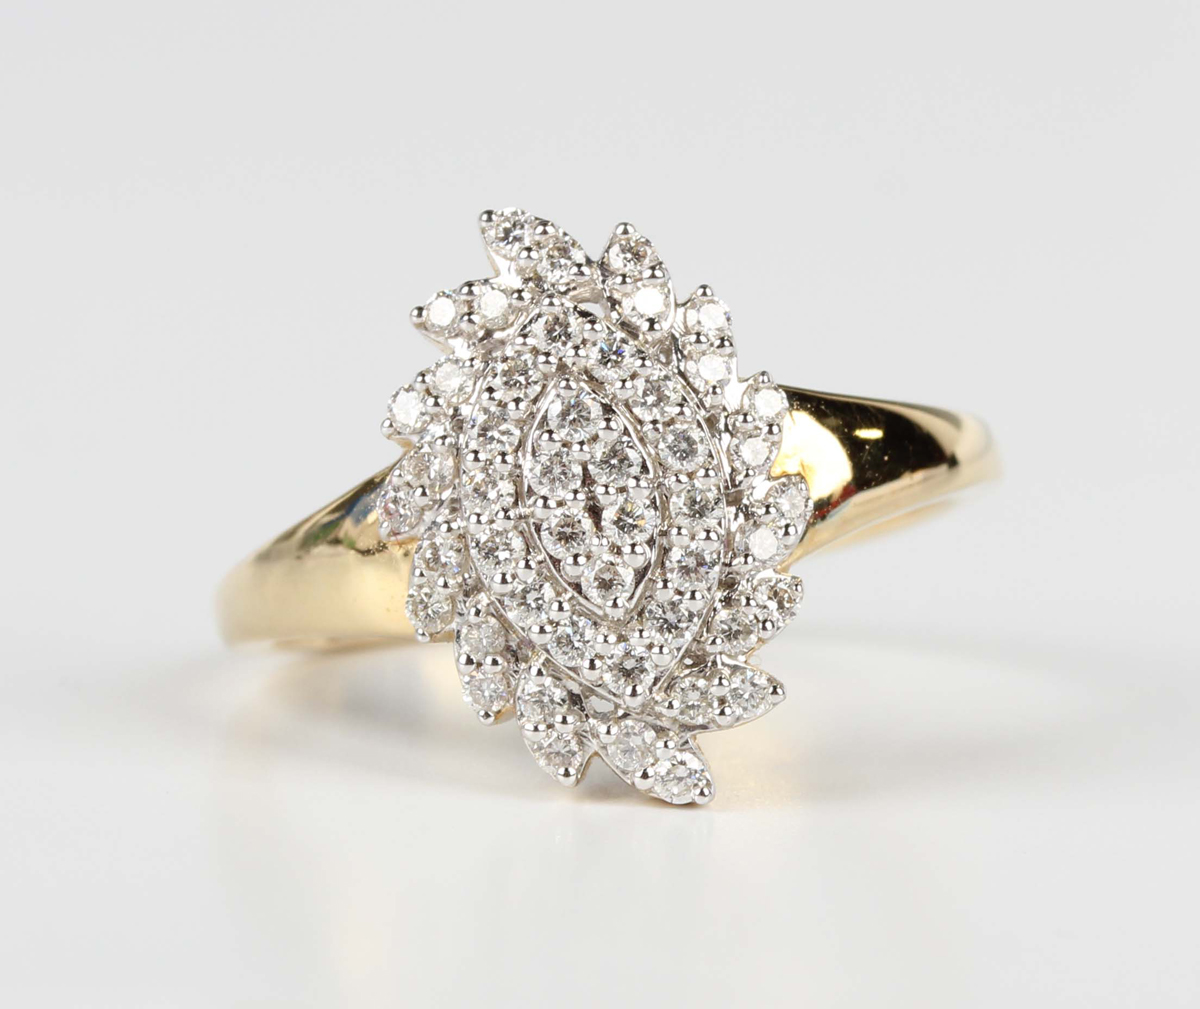 A Tomas Rae 18ct gold and diamond ring in a spiral oval cluster design, mounted with circular cut - Image 6 of 6